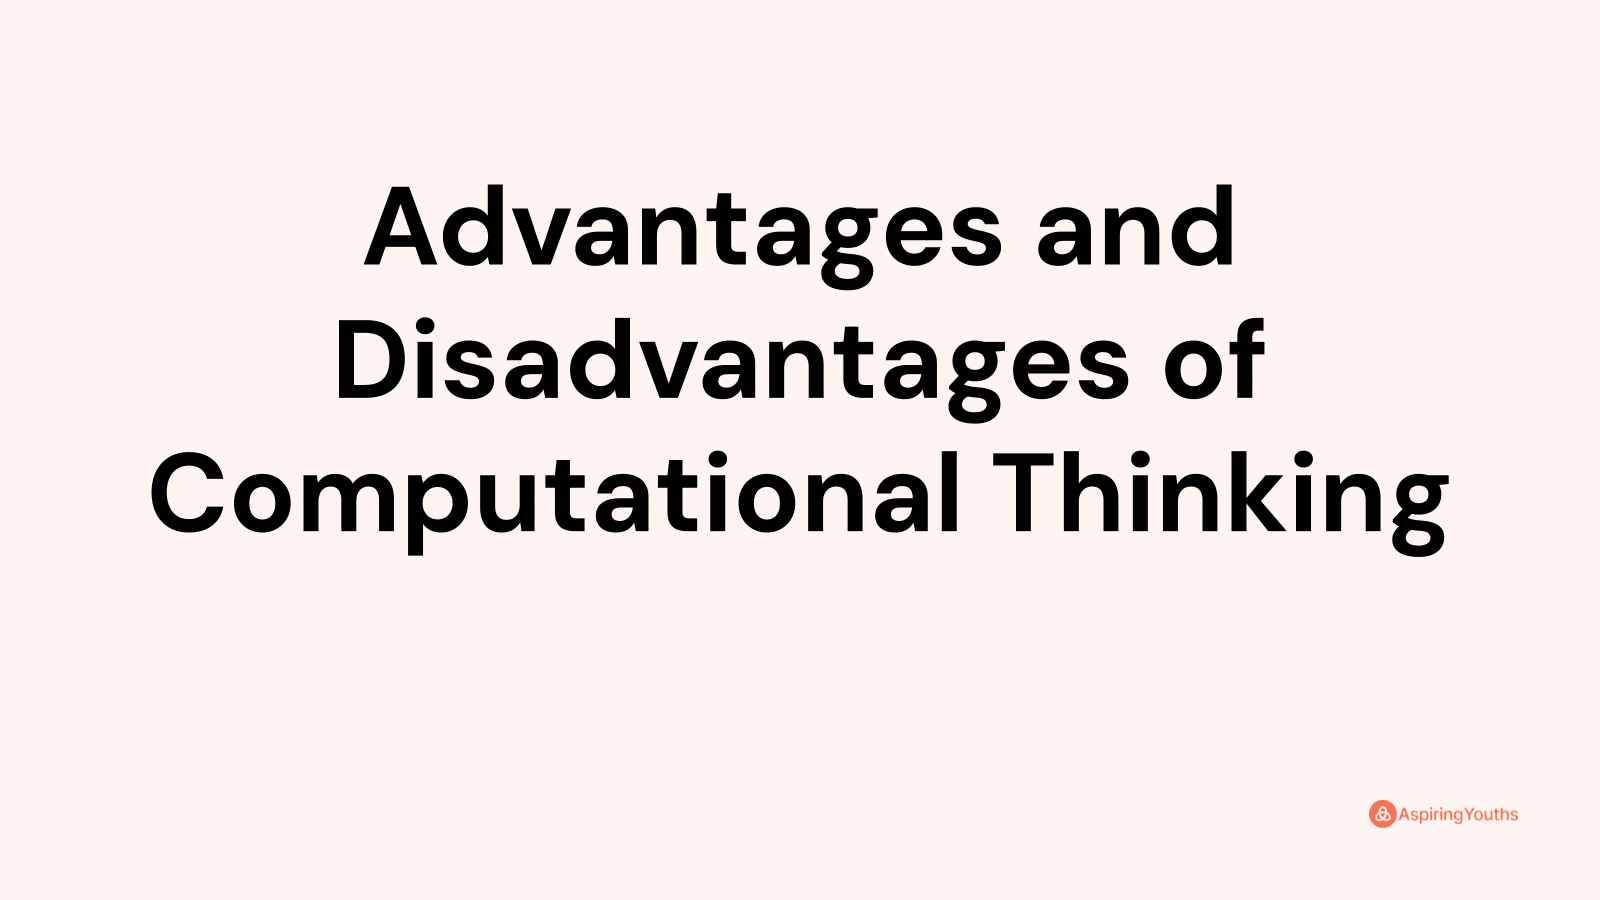 Advantages and disadvantages of Computational Thinking